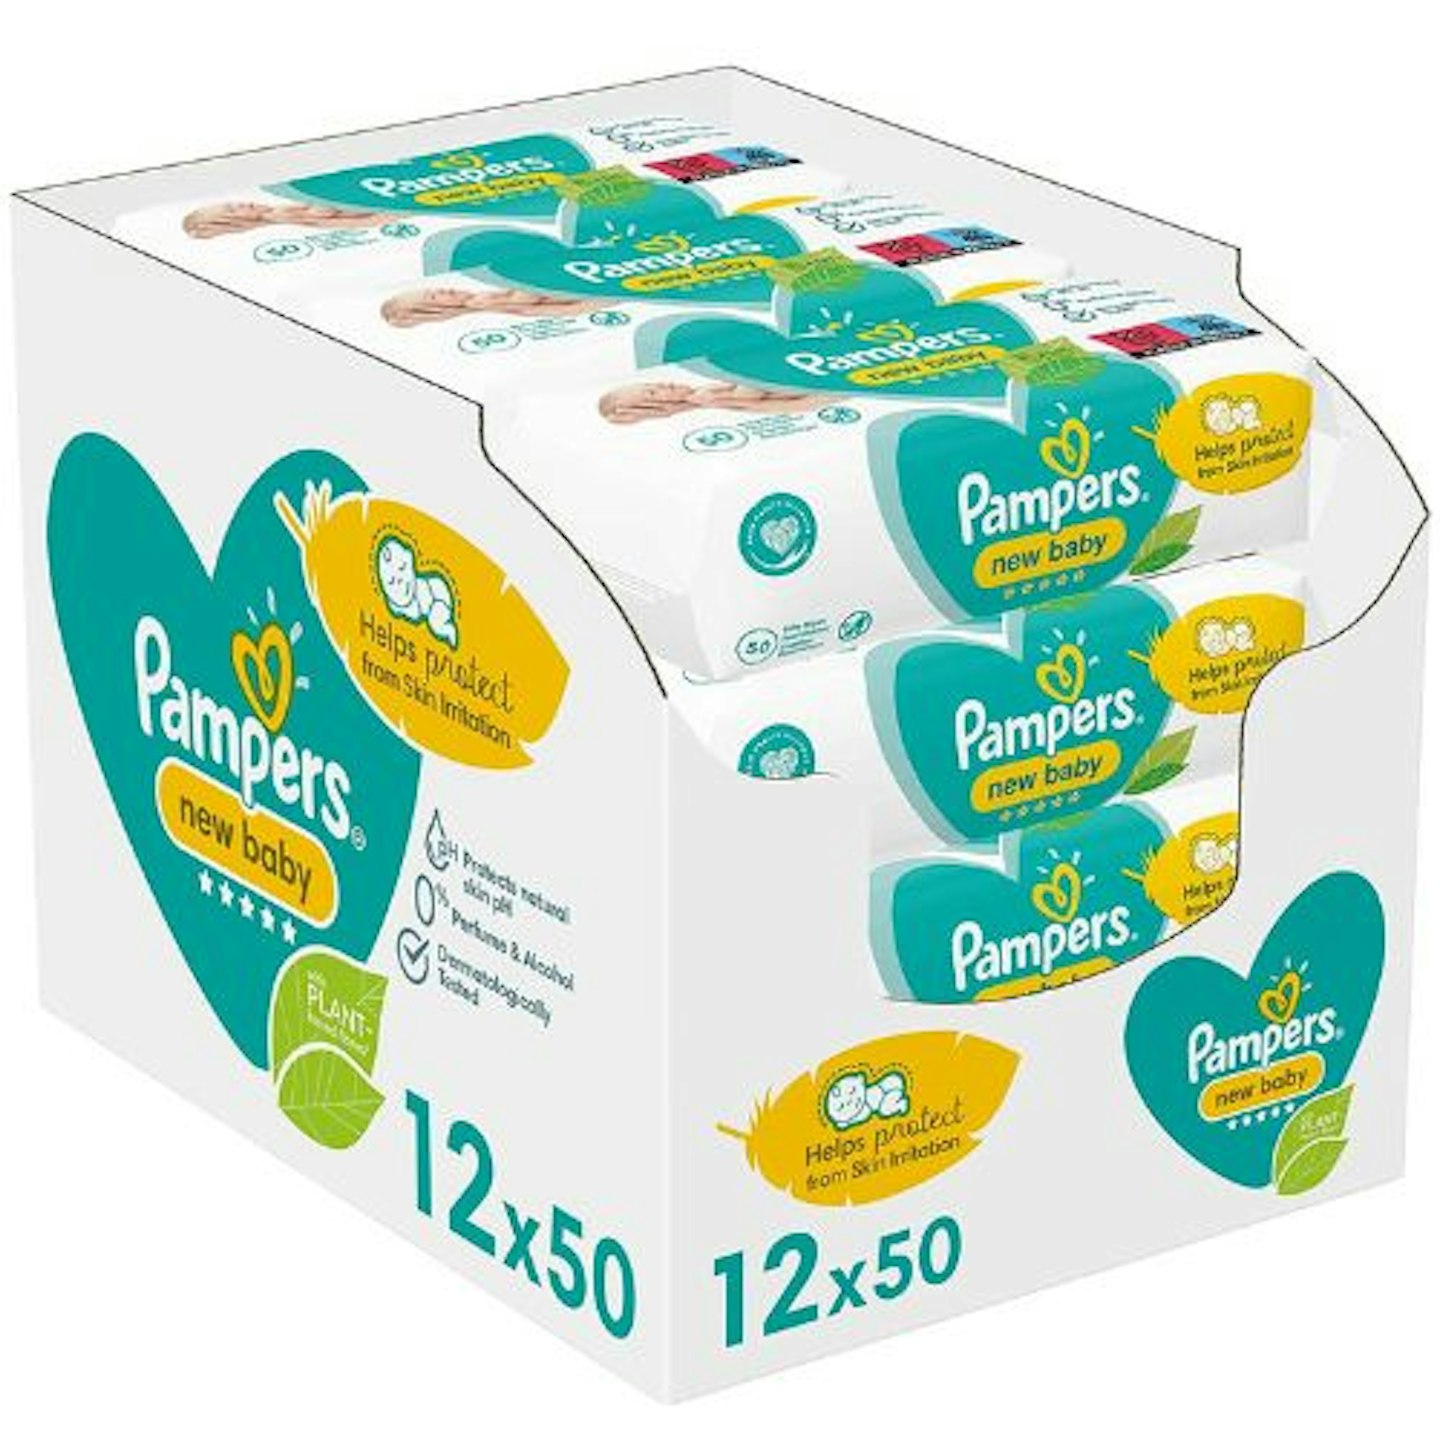 2023 Baby Wipes Review: Momcozy vs. WaterWipes vs. Pampers Aqua